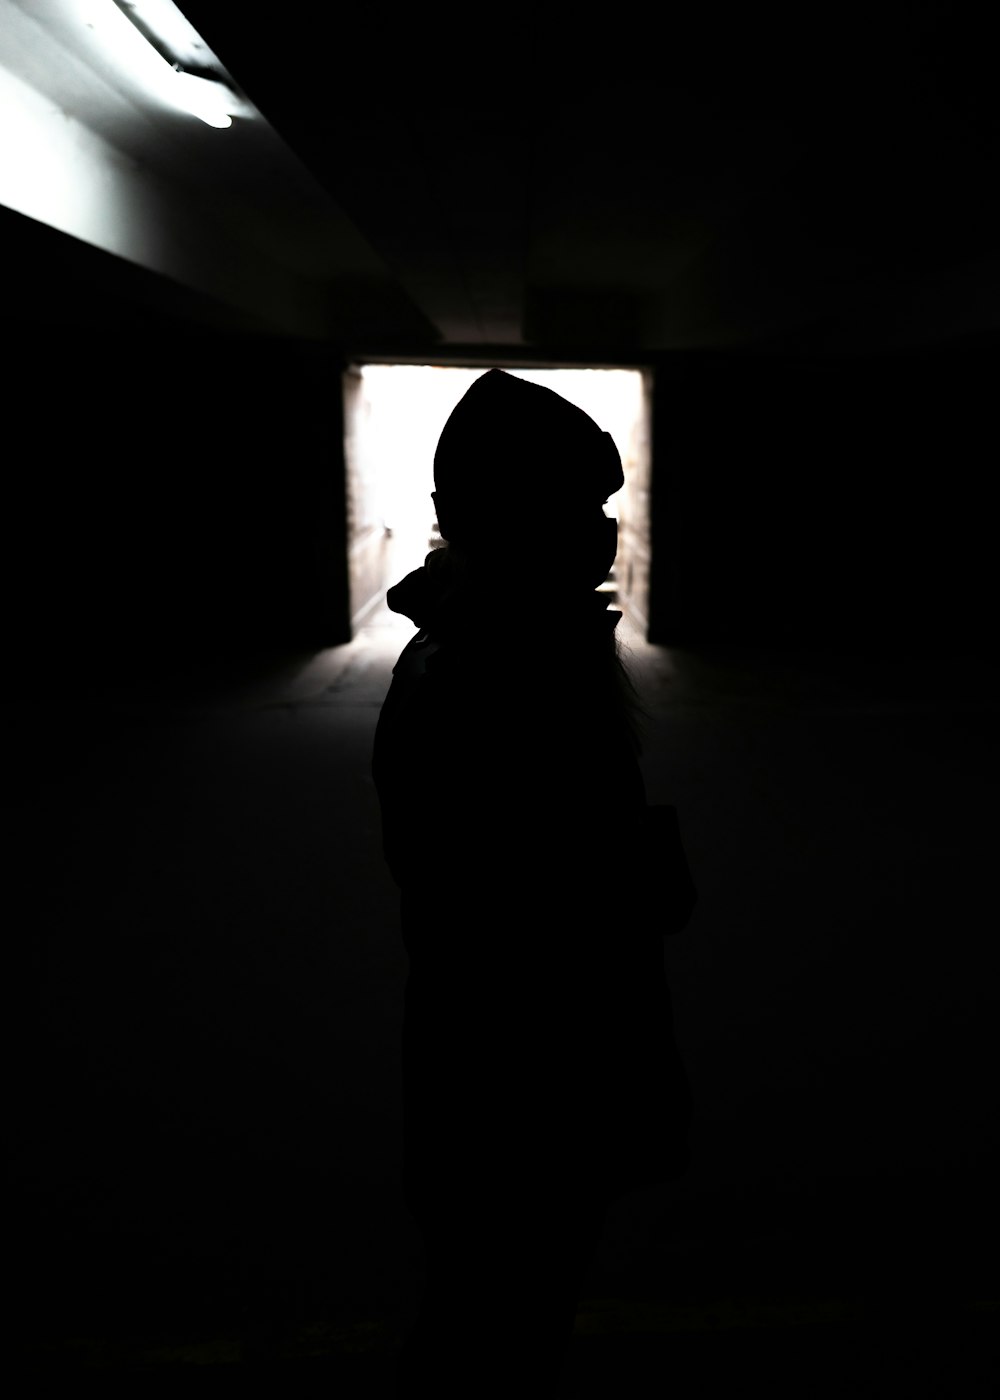 HD wallpaper: silhouette of person standing inside room